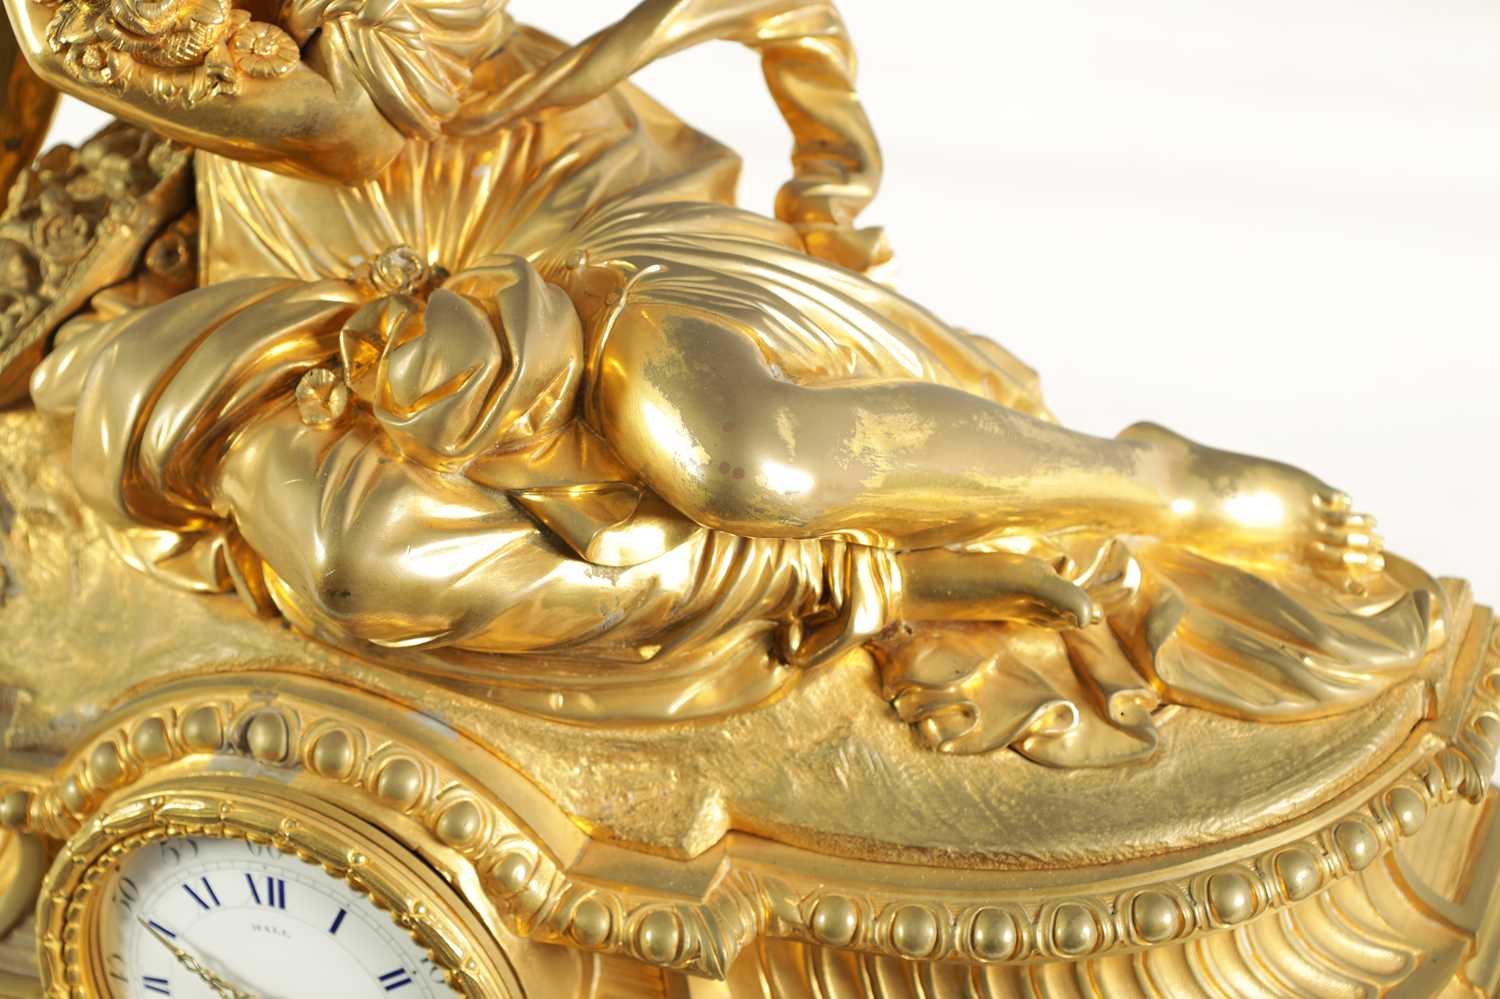 A LARGE 19TH CENTURY FRENCH FIGURAL ORMOLU MANTEL CLOCK - Image 4 of 11